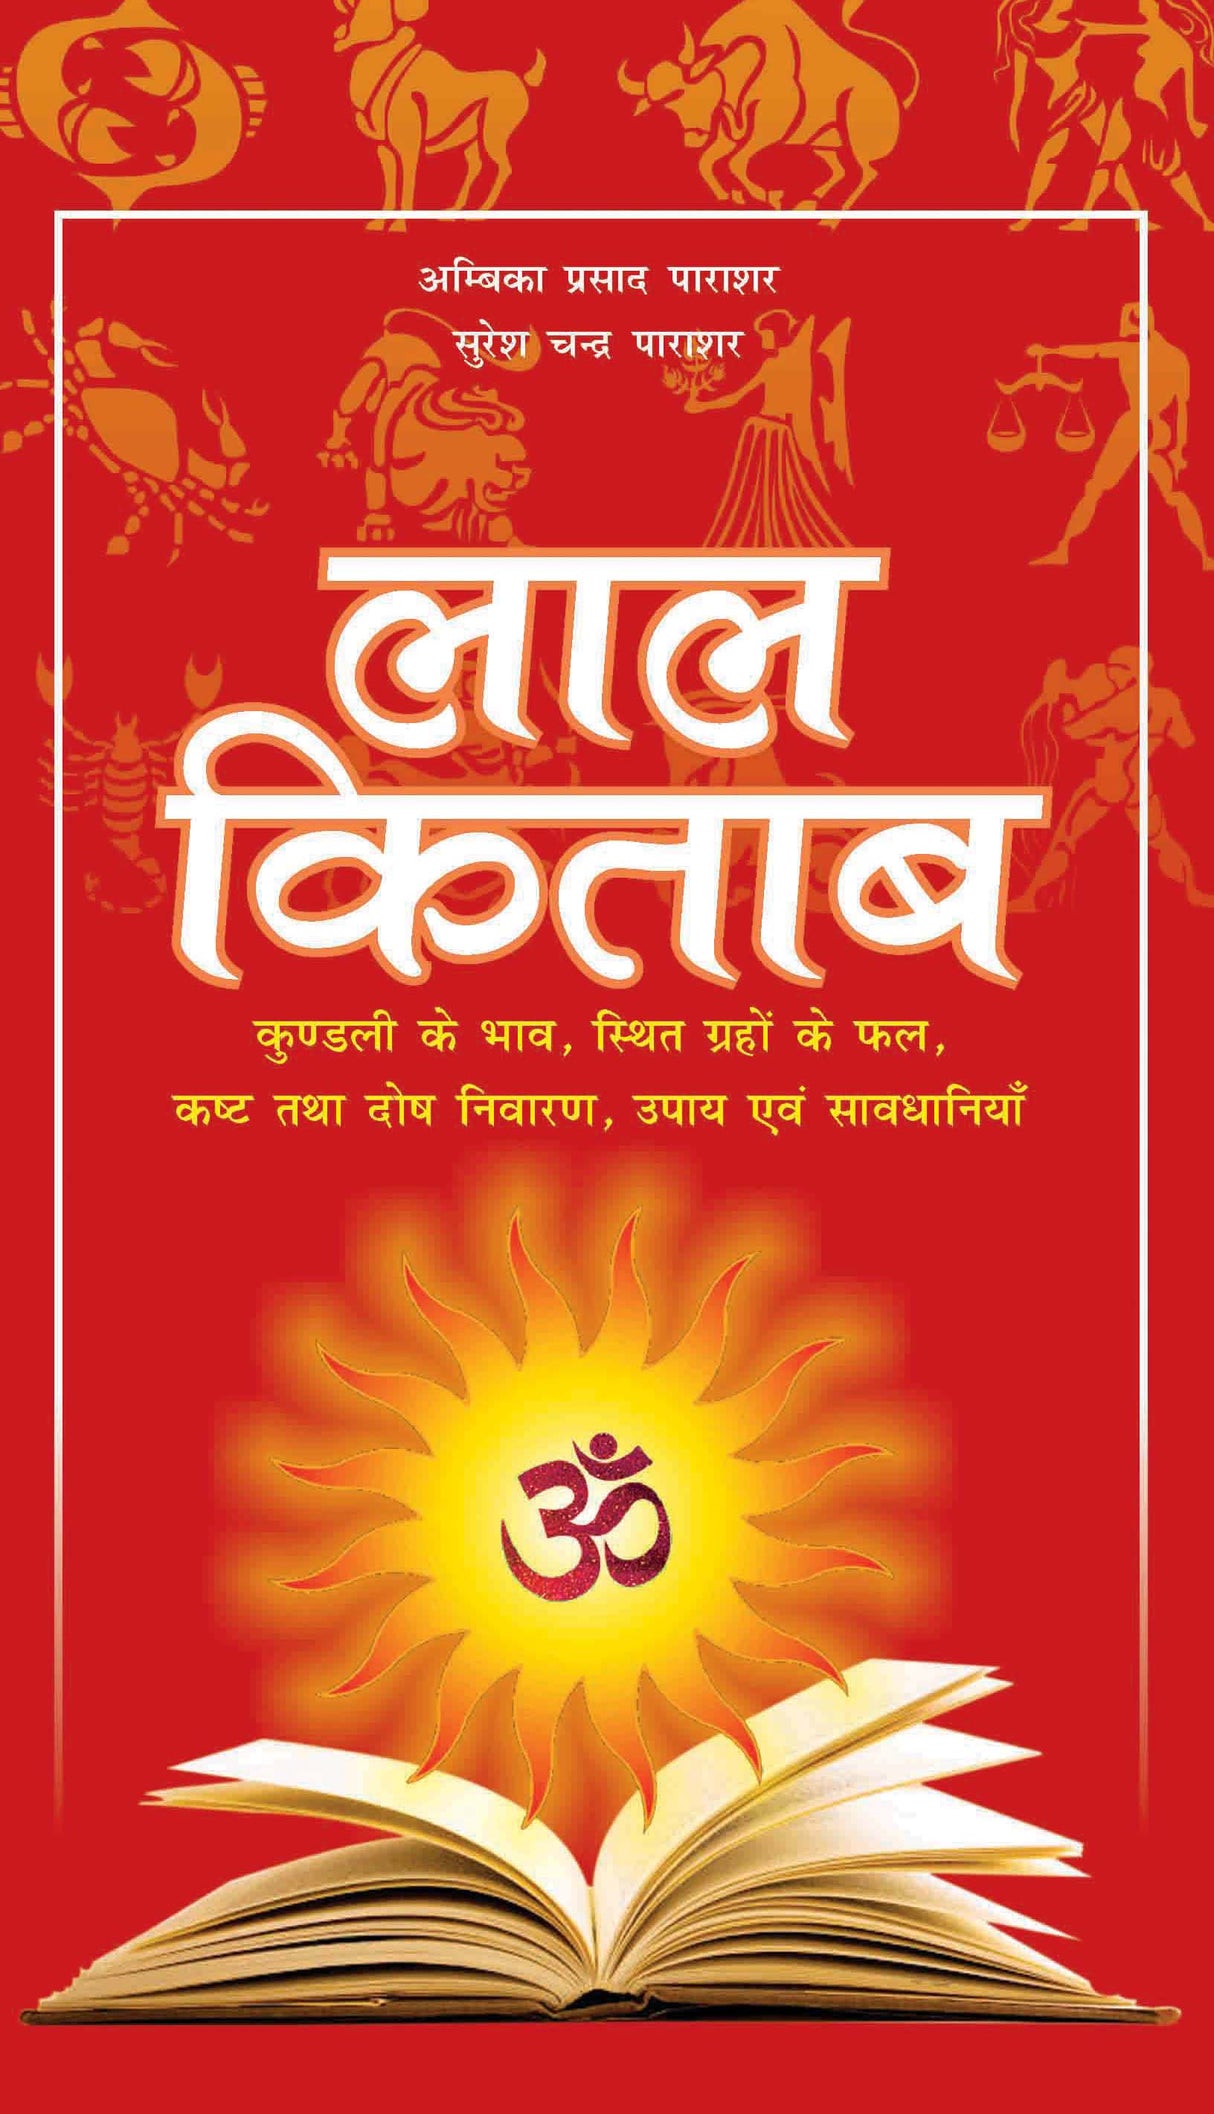 Lal Kitab: Most popular book to predict future through Astrology & Palmistry